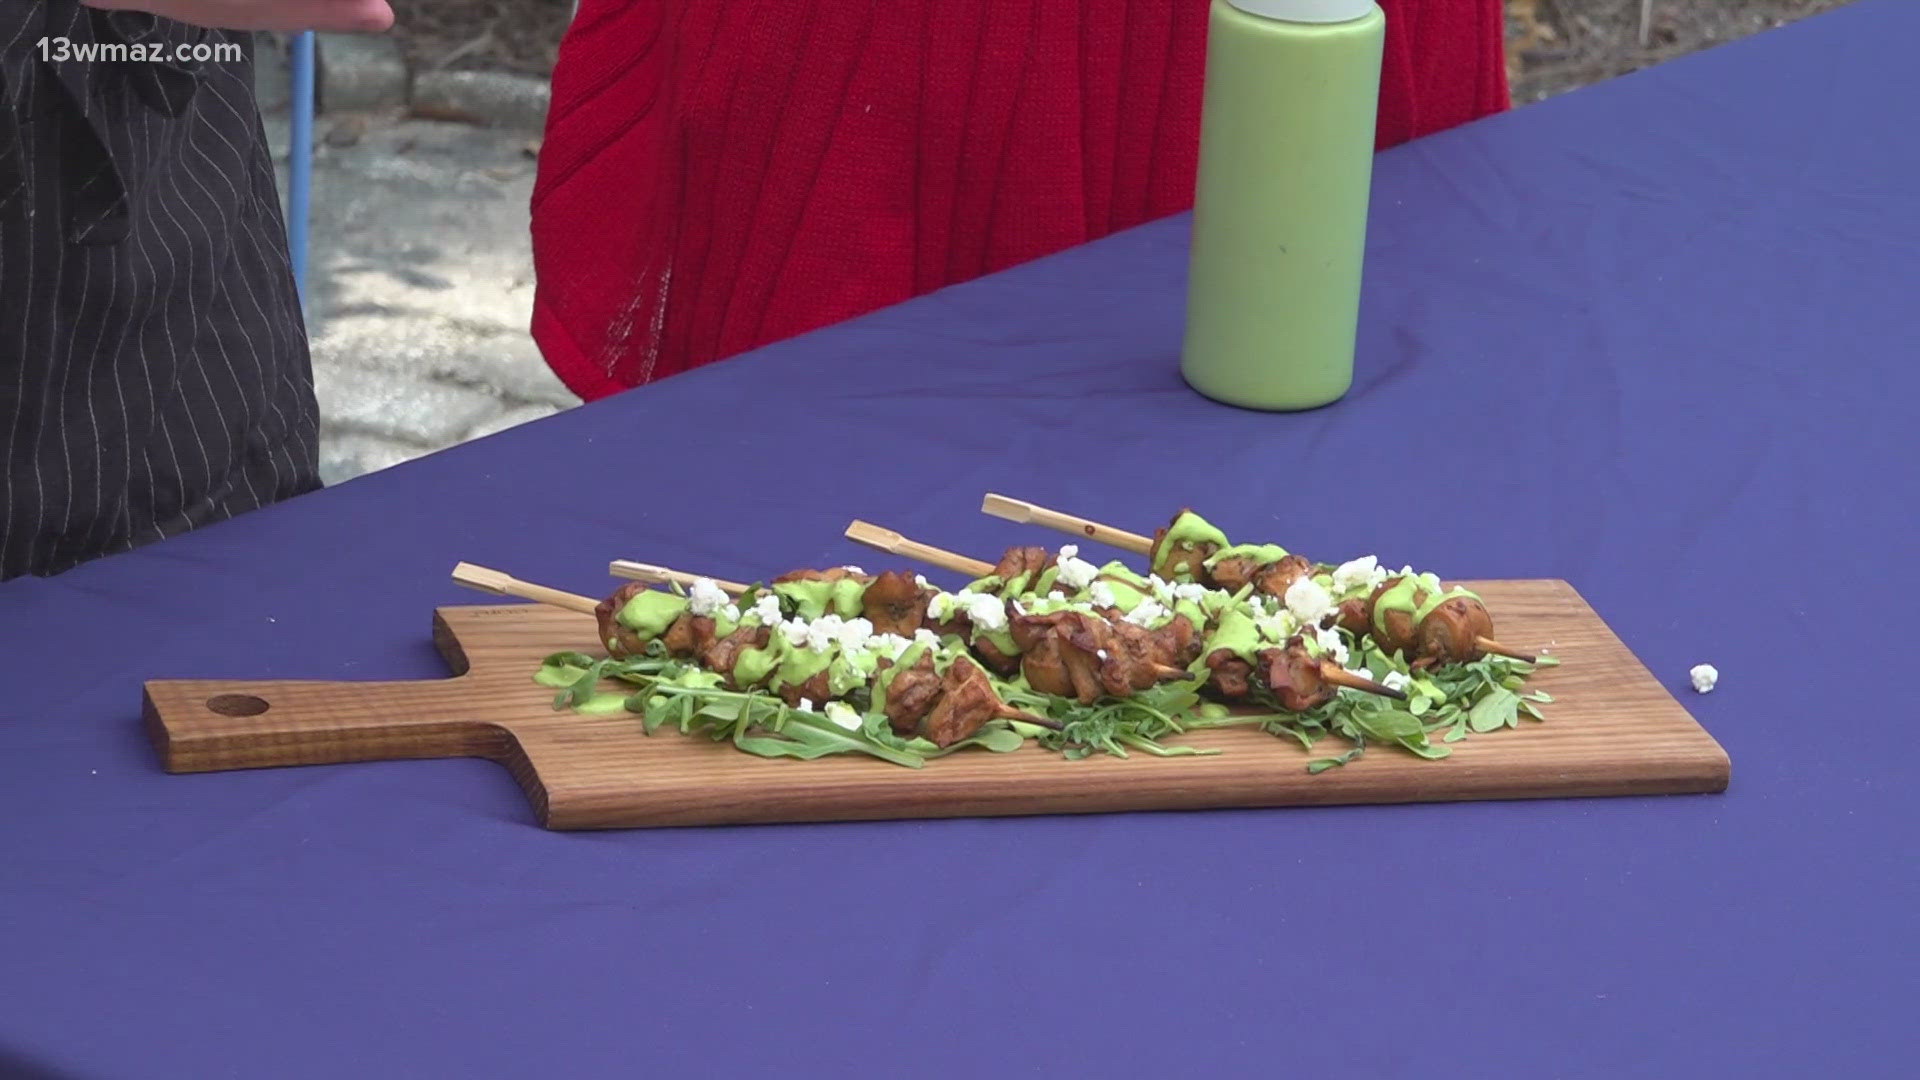 Helms Culinary Instructor and Chef Lynae Radke cooks up her own personal recipe for peruvian chicken skewers with a aji verde sauce